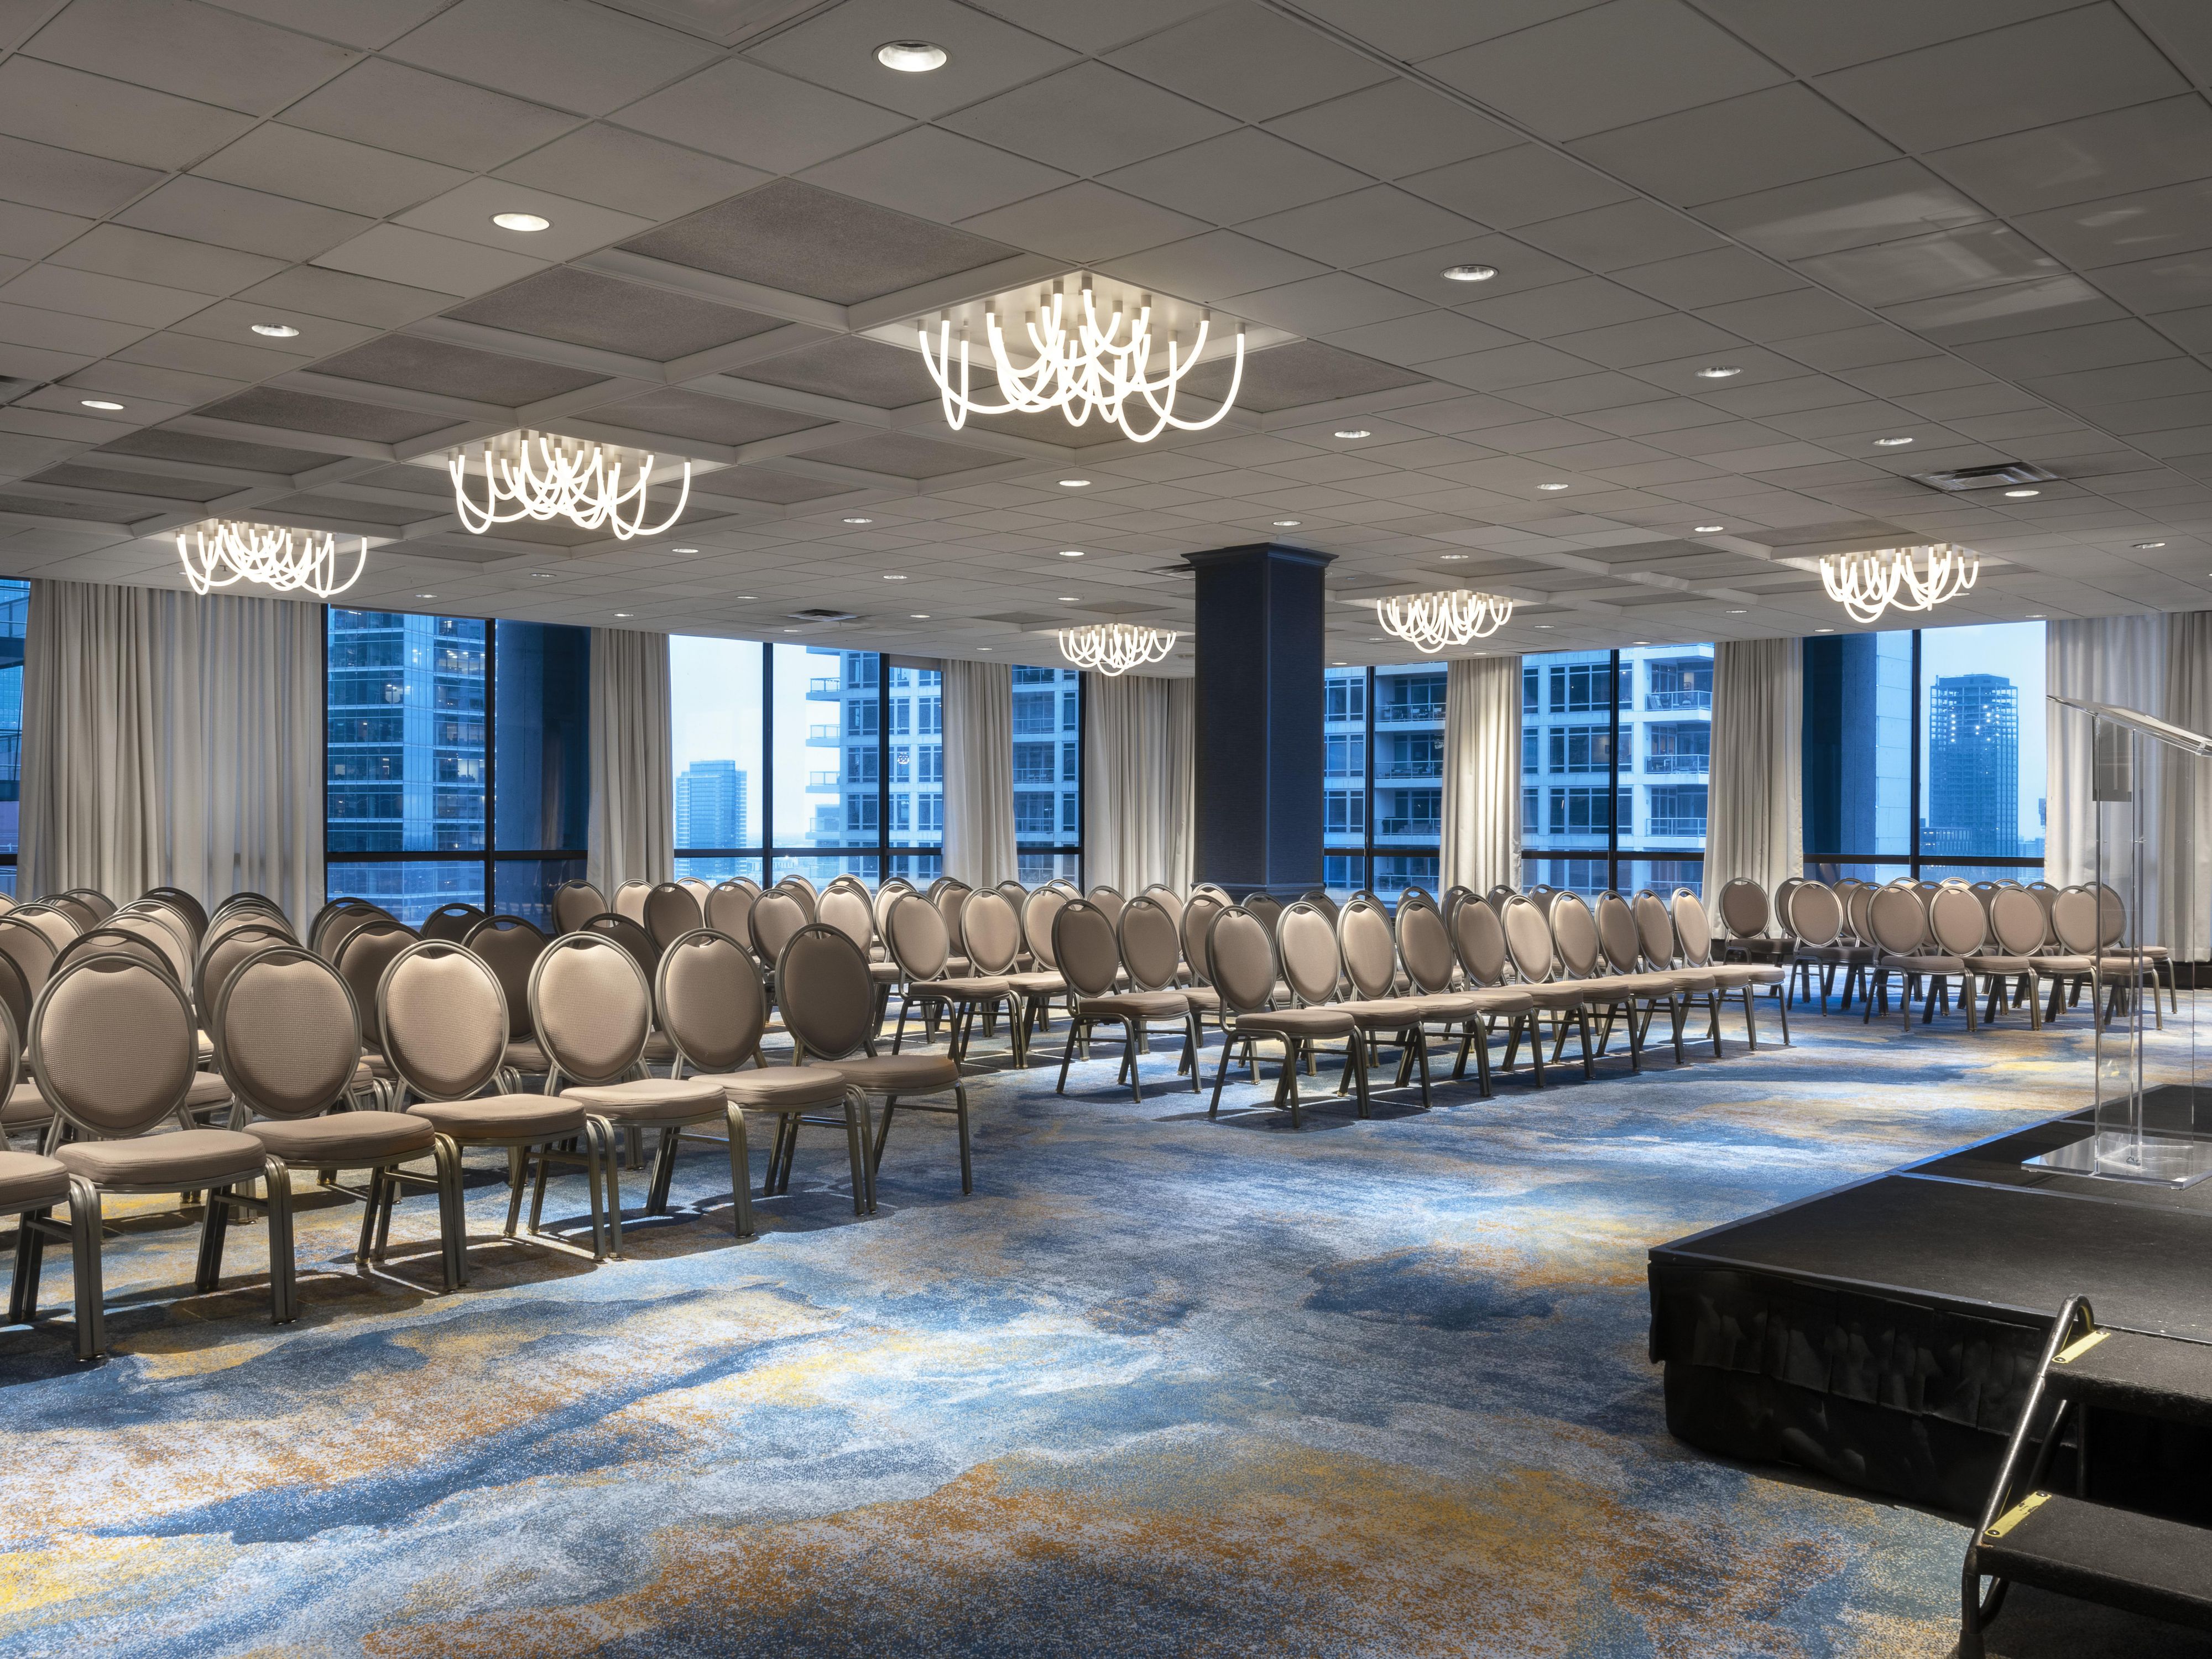 Take advantage of 25,000 square feet of space for hosting business meetings, seminars, and conferences. Our flexible meeting spaces are fully equipped with A/V equipment, printer, scanner, and other office essentials.